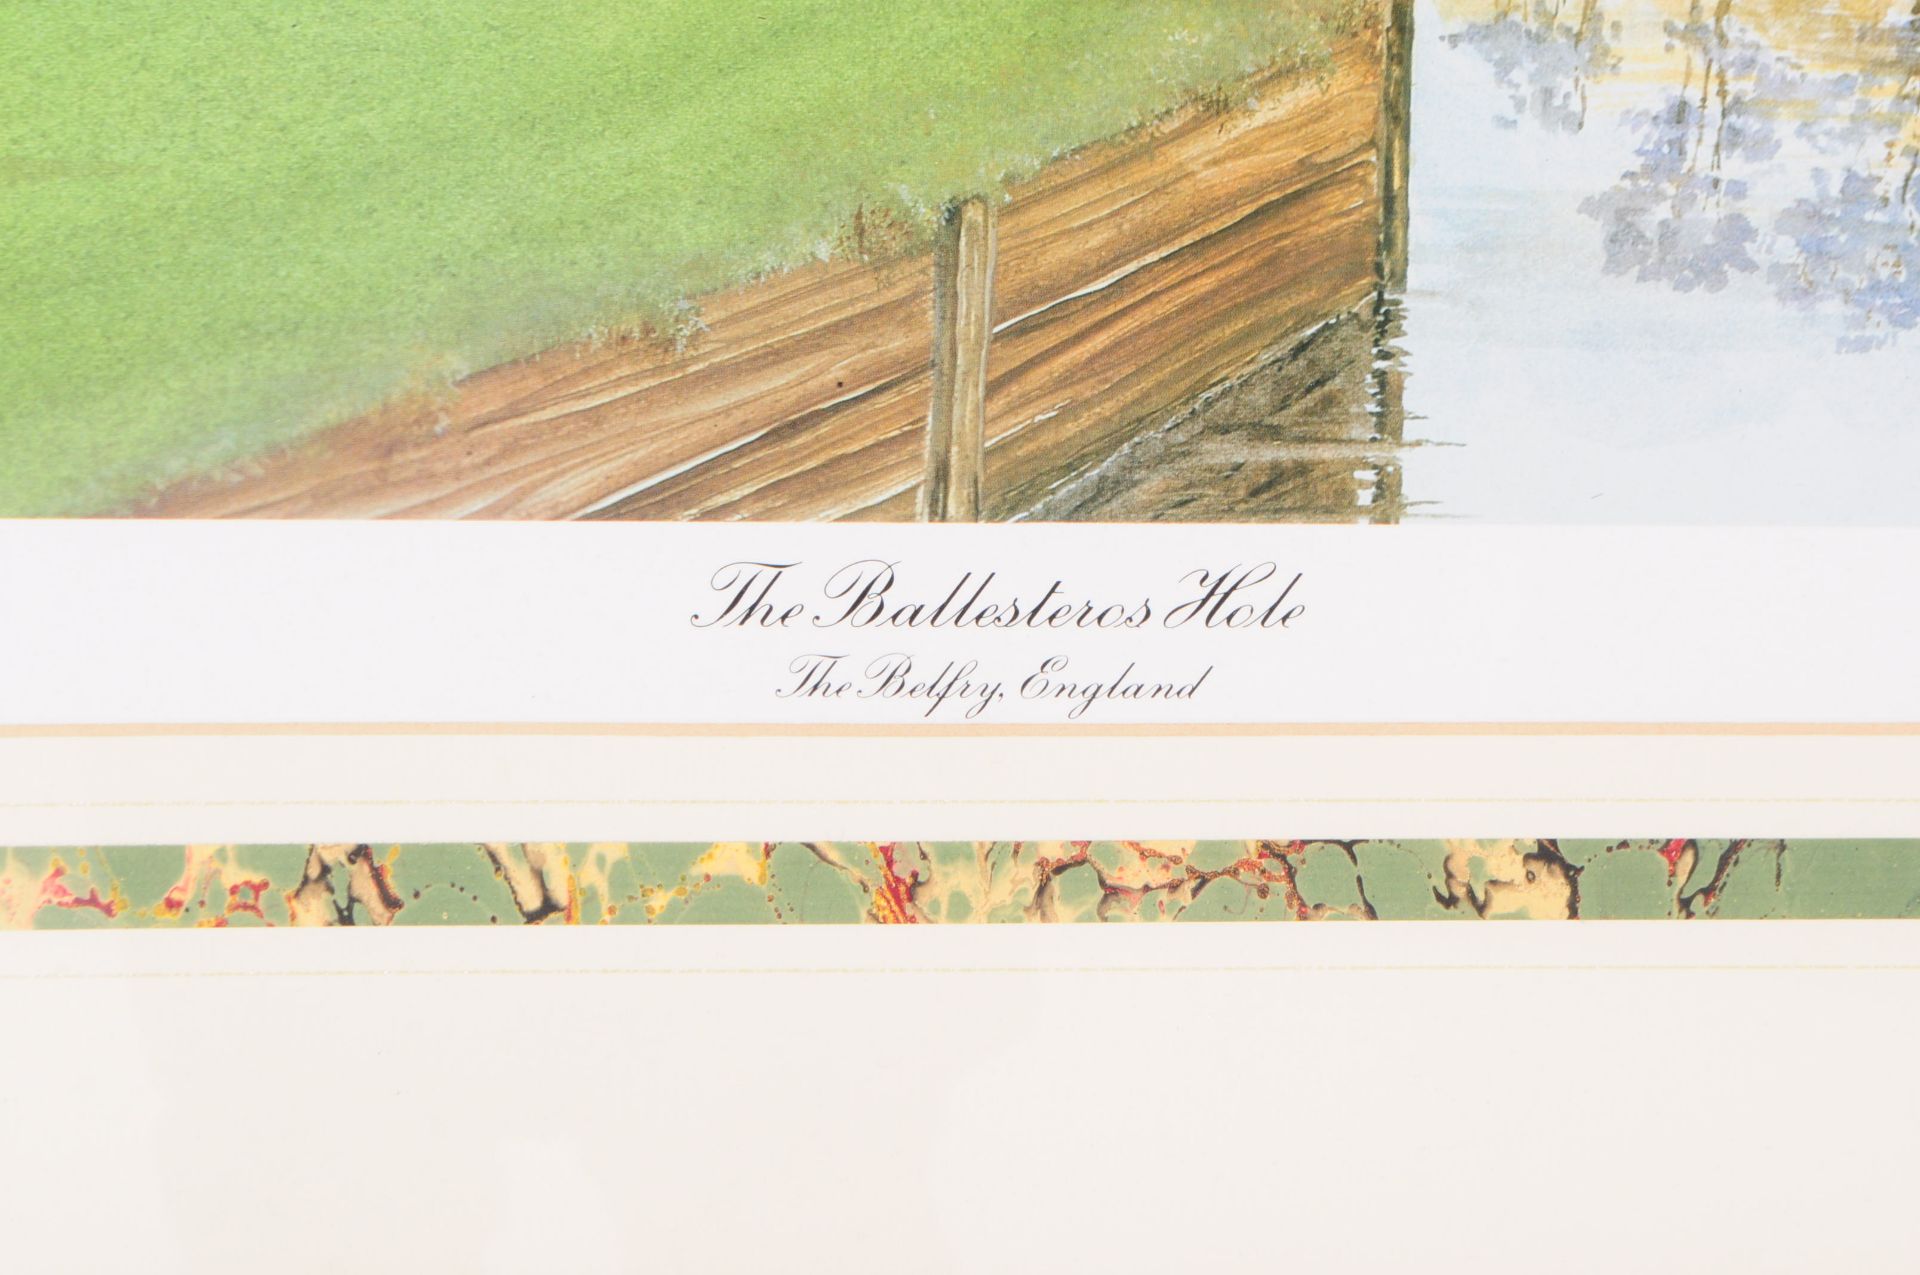 WILLIAM WAUGH - THE BALLESTEROS HOLE - SIGNED GOLF PRINT - Image 3 of 5